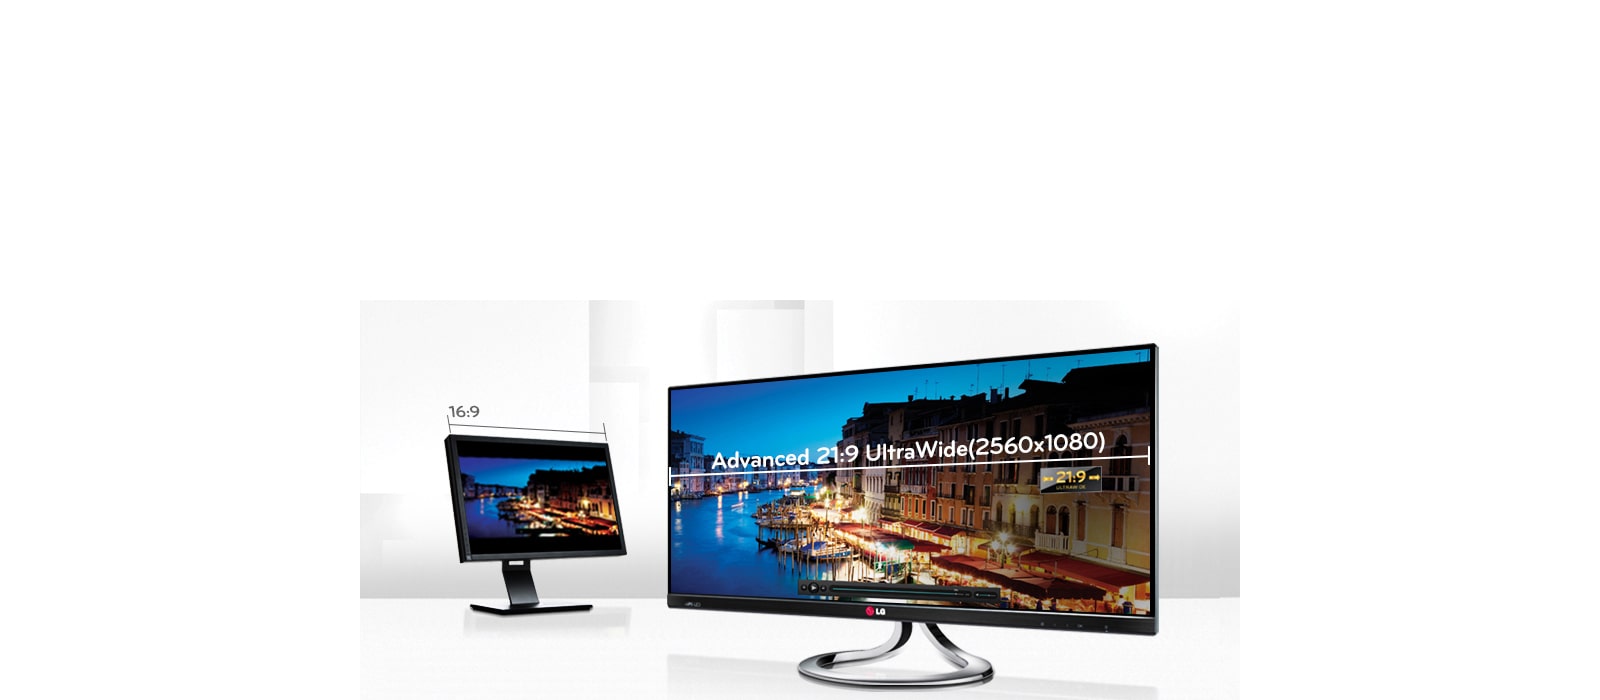 21:9 UltraWide Screen <img src="/africa/images/monitors/features/1_21_9.jpg" alt="">1